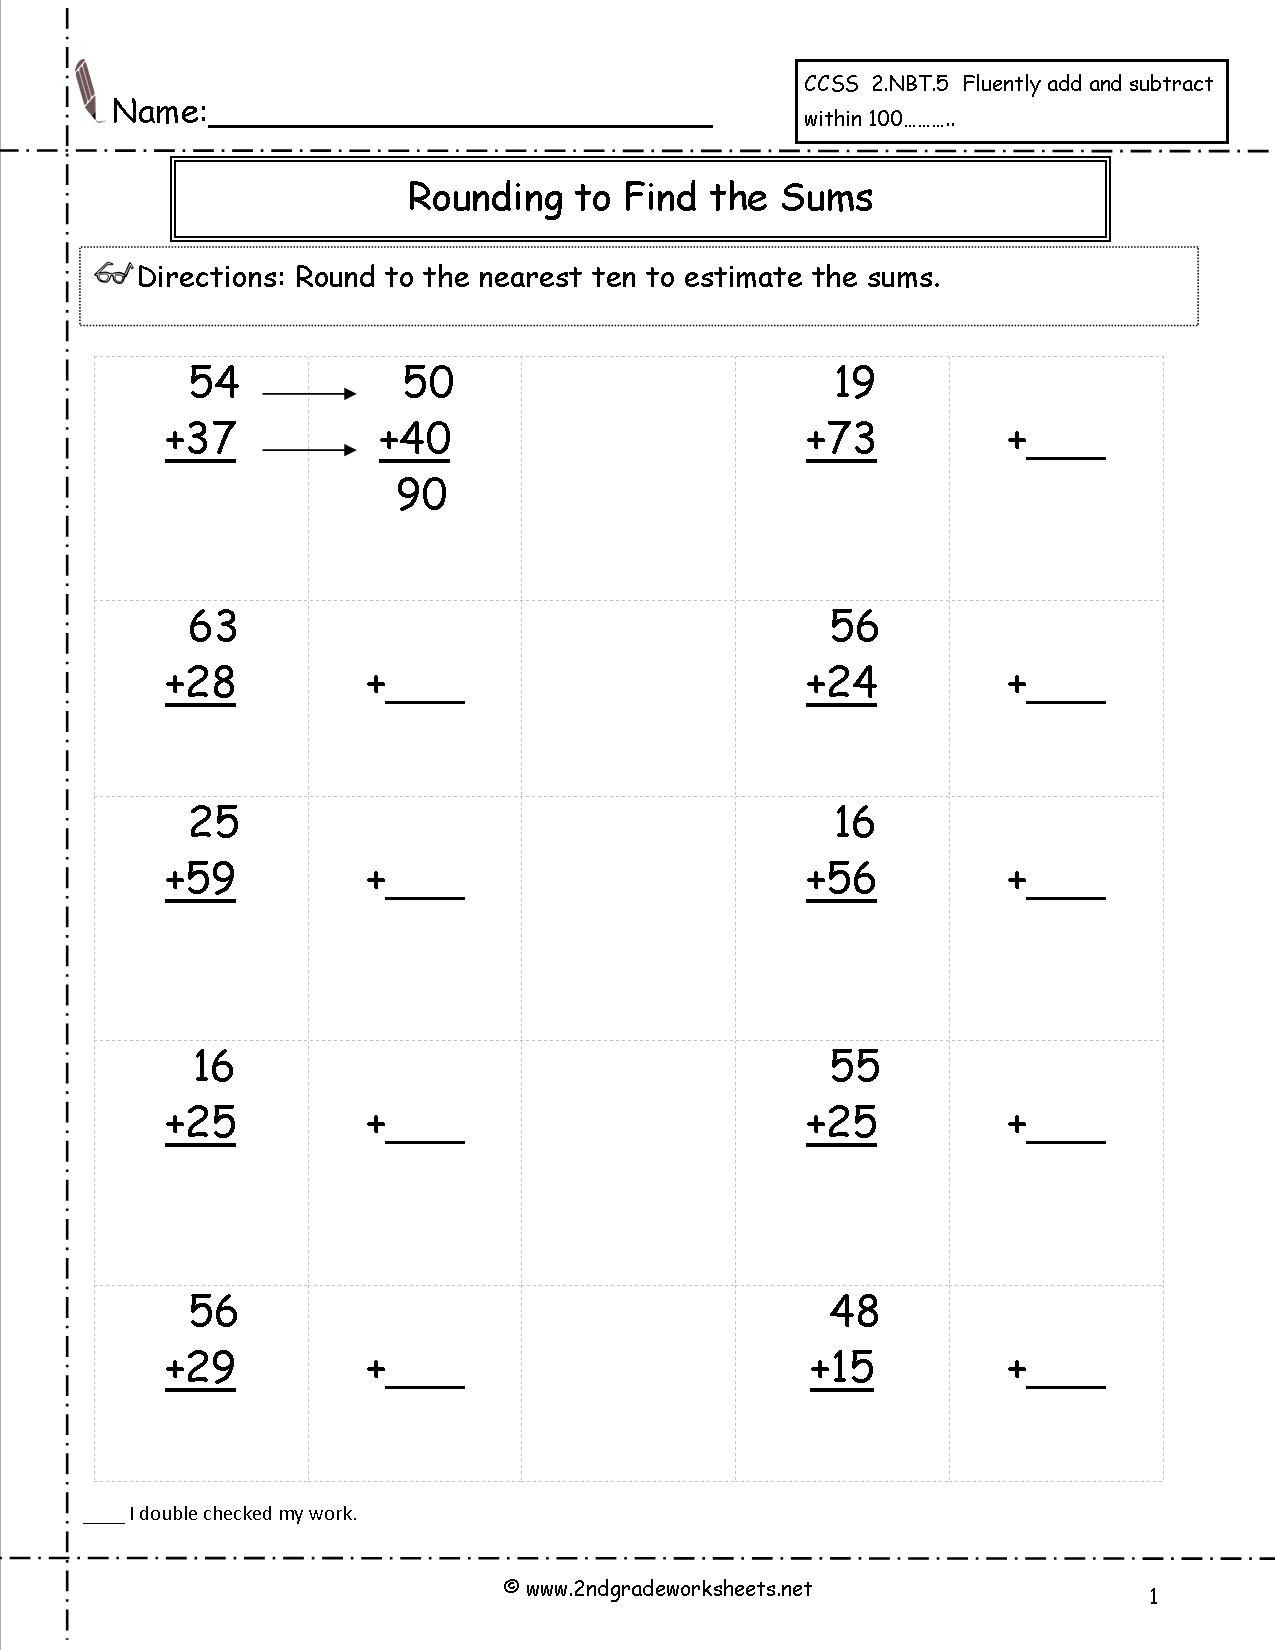 Estimating Sums Worksheets 3rd Grade Rounding to Add Worksheets